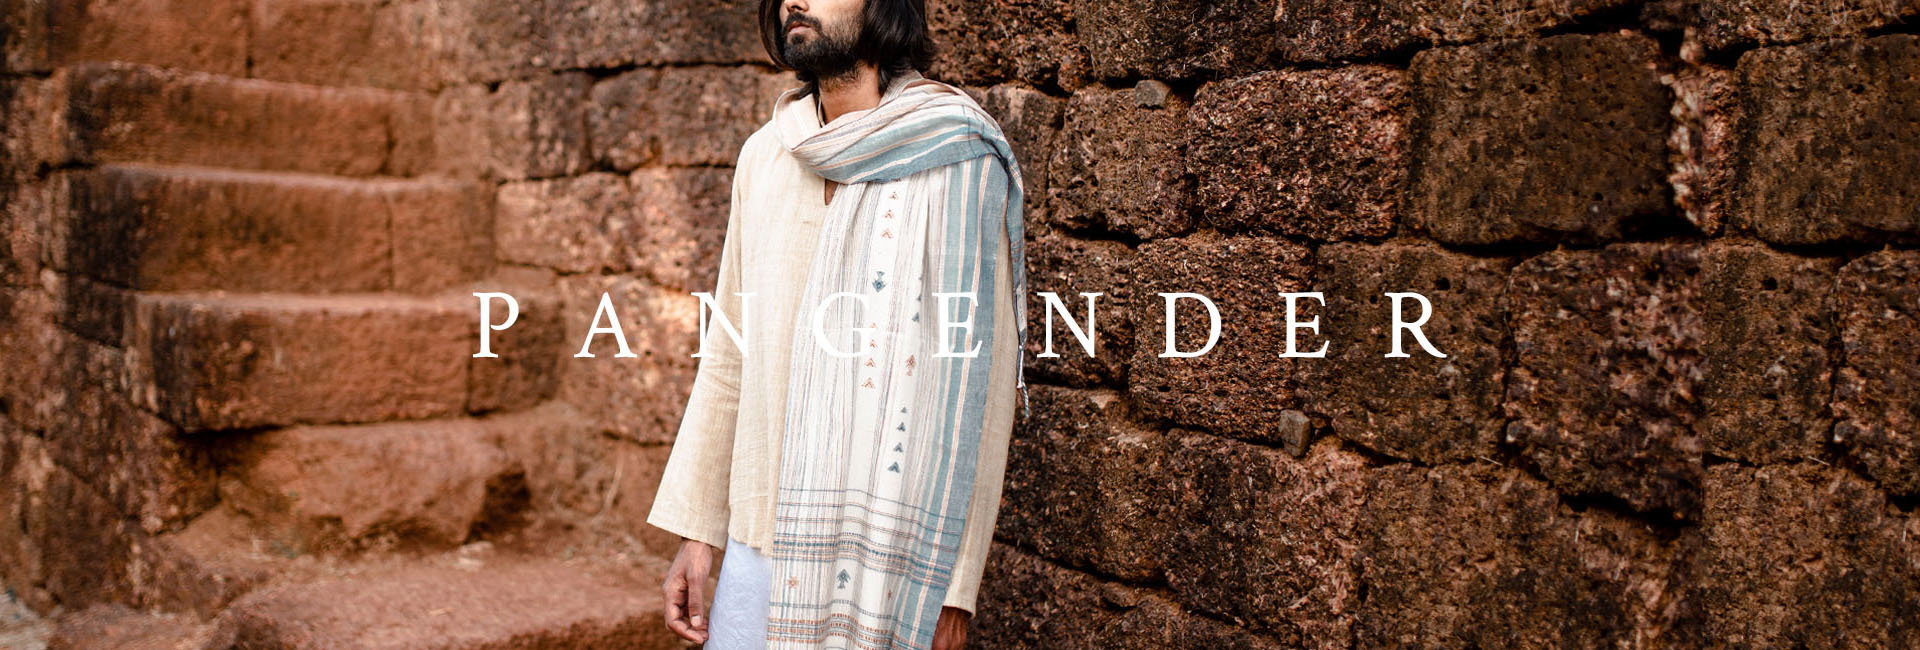 Pangender clothing, pangender cotton clothing, unisex clothing, Sepia stories, Handmade products online, 100% Natural fashion accessories online, Best organic online store, Organic products India, Organic brands online, Natural handmade products, Fashion accessories online, Online store, Praful Makhwana, Mister and Mister, Socially conscious brand, Indian handmade products, Indian designer brand, Indian accessories, Women Dresses online, shop organic handmade dresses, handmade dresses for women, shop women dresses online, designer dresses, Indian handmade dresses, fashionable dresses, Women dresses, organic dresses, dresses for women, designer women dresses, handmade women dresses, organic handmade clothing, handmade organic clothing, natural fabrics, handcrafted clothing in India, organic fabrics, eco-friendly clothing brands, organic clothing range, sustainable clothing, Organic Pangender Clothing, gender neutral clothing, pangender clothing brand, lgbtq clothing, pride clothing, unisex clothing stores online, Sepia Stories, clothing store, cotton clothing store, Pangender Clothing, clothing shop, Cotton clothing, gender neutral clothing brands, lgbtq clothing style, clothing shop, unisex clothing